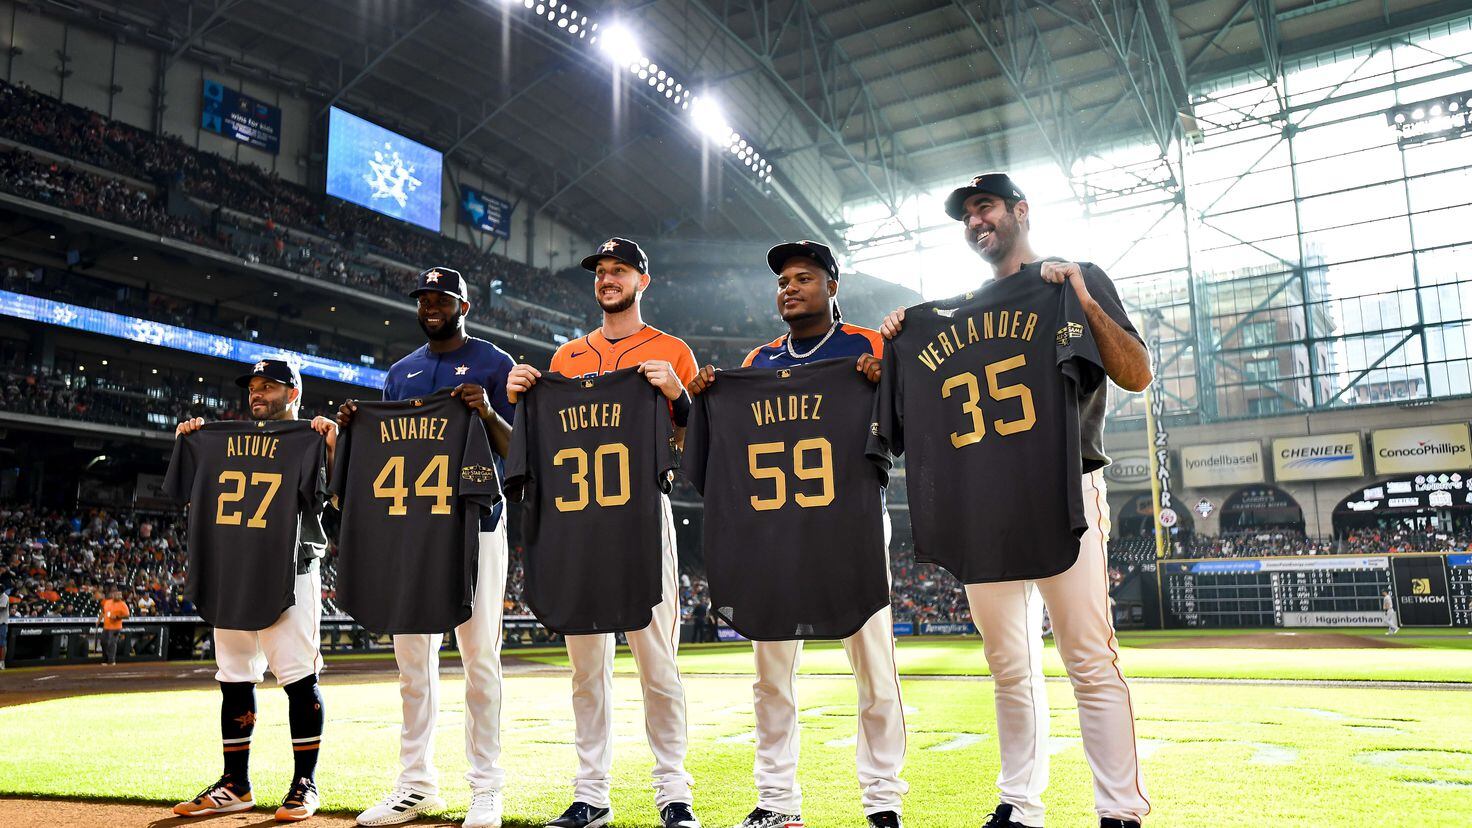 American League wins 9th straight All-Star Game